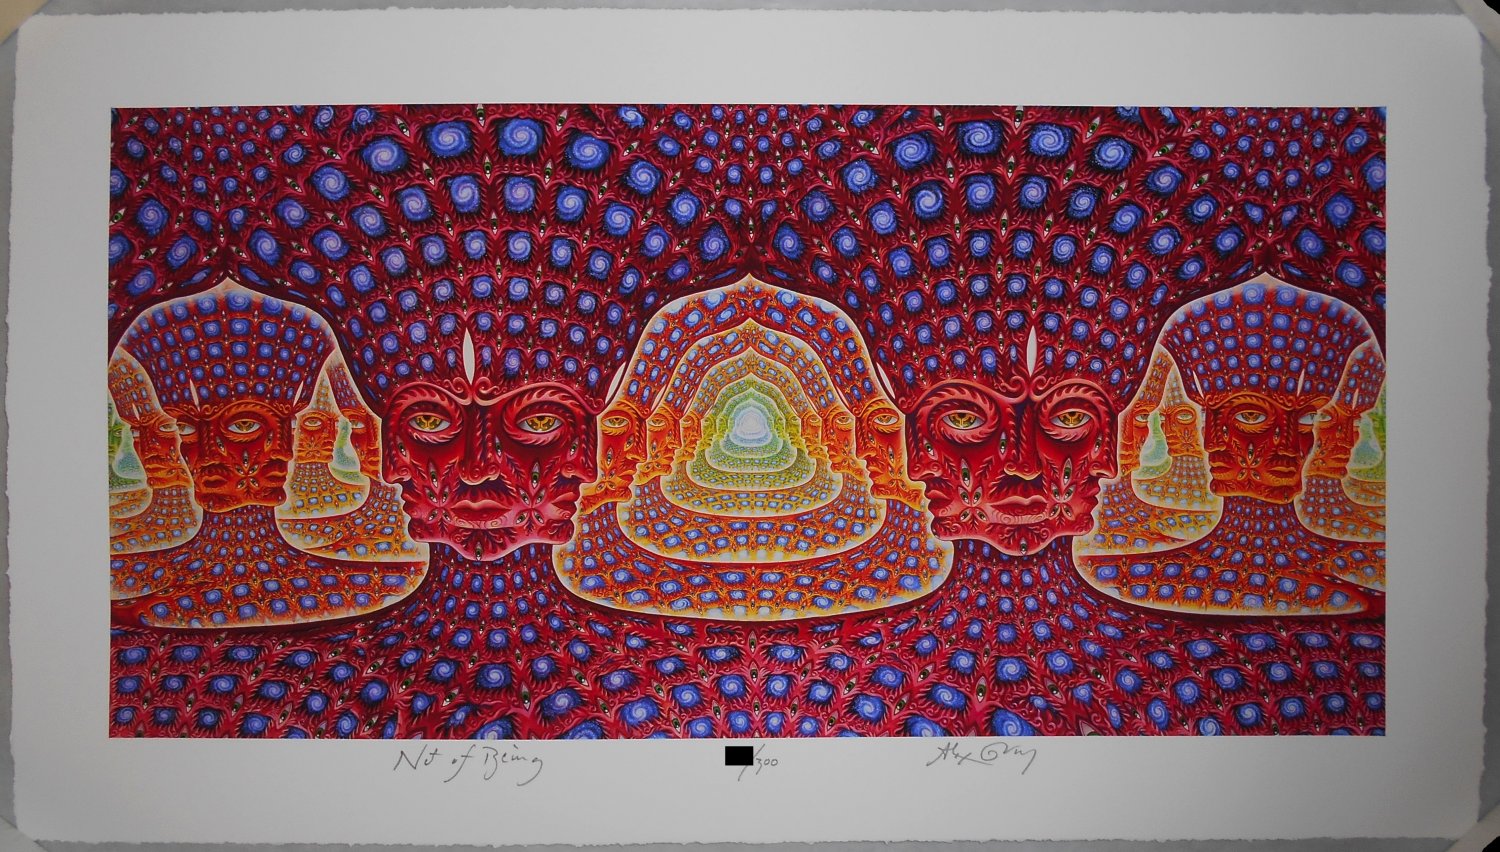 Alex Grey Net Of Being Archival Print Signed #/300 TOOL 10,000 Days COA Poster